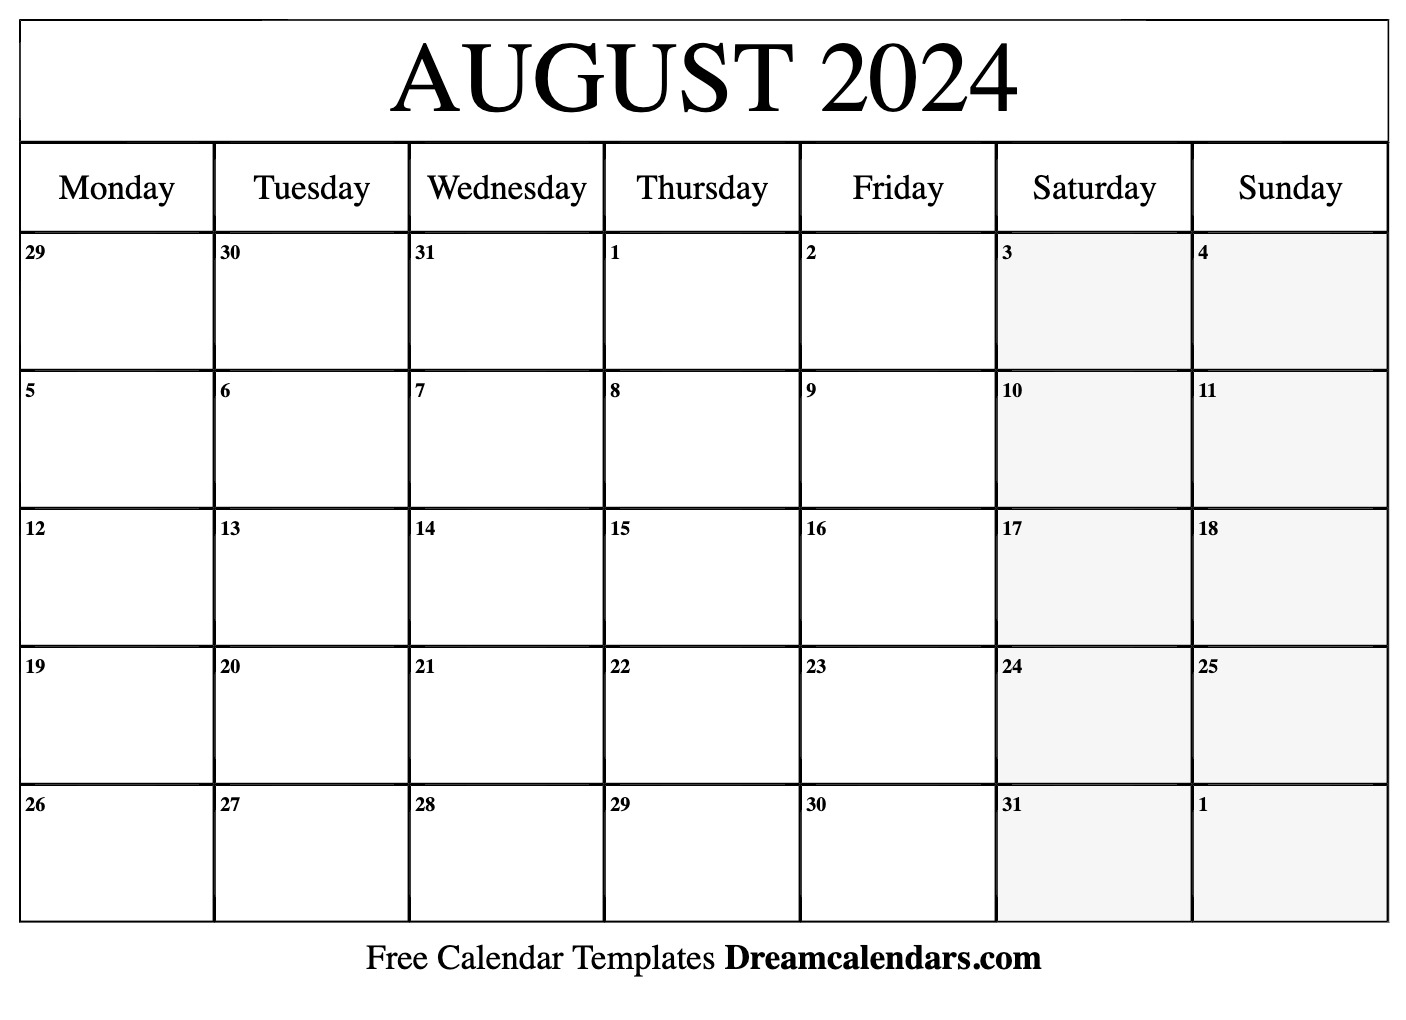 August 2024 Calendar | Free Blank Printable With Holidays for Printable May June July August 2024 Calendar